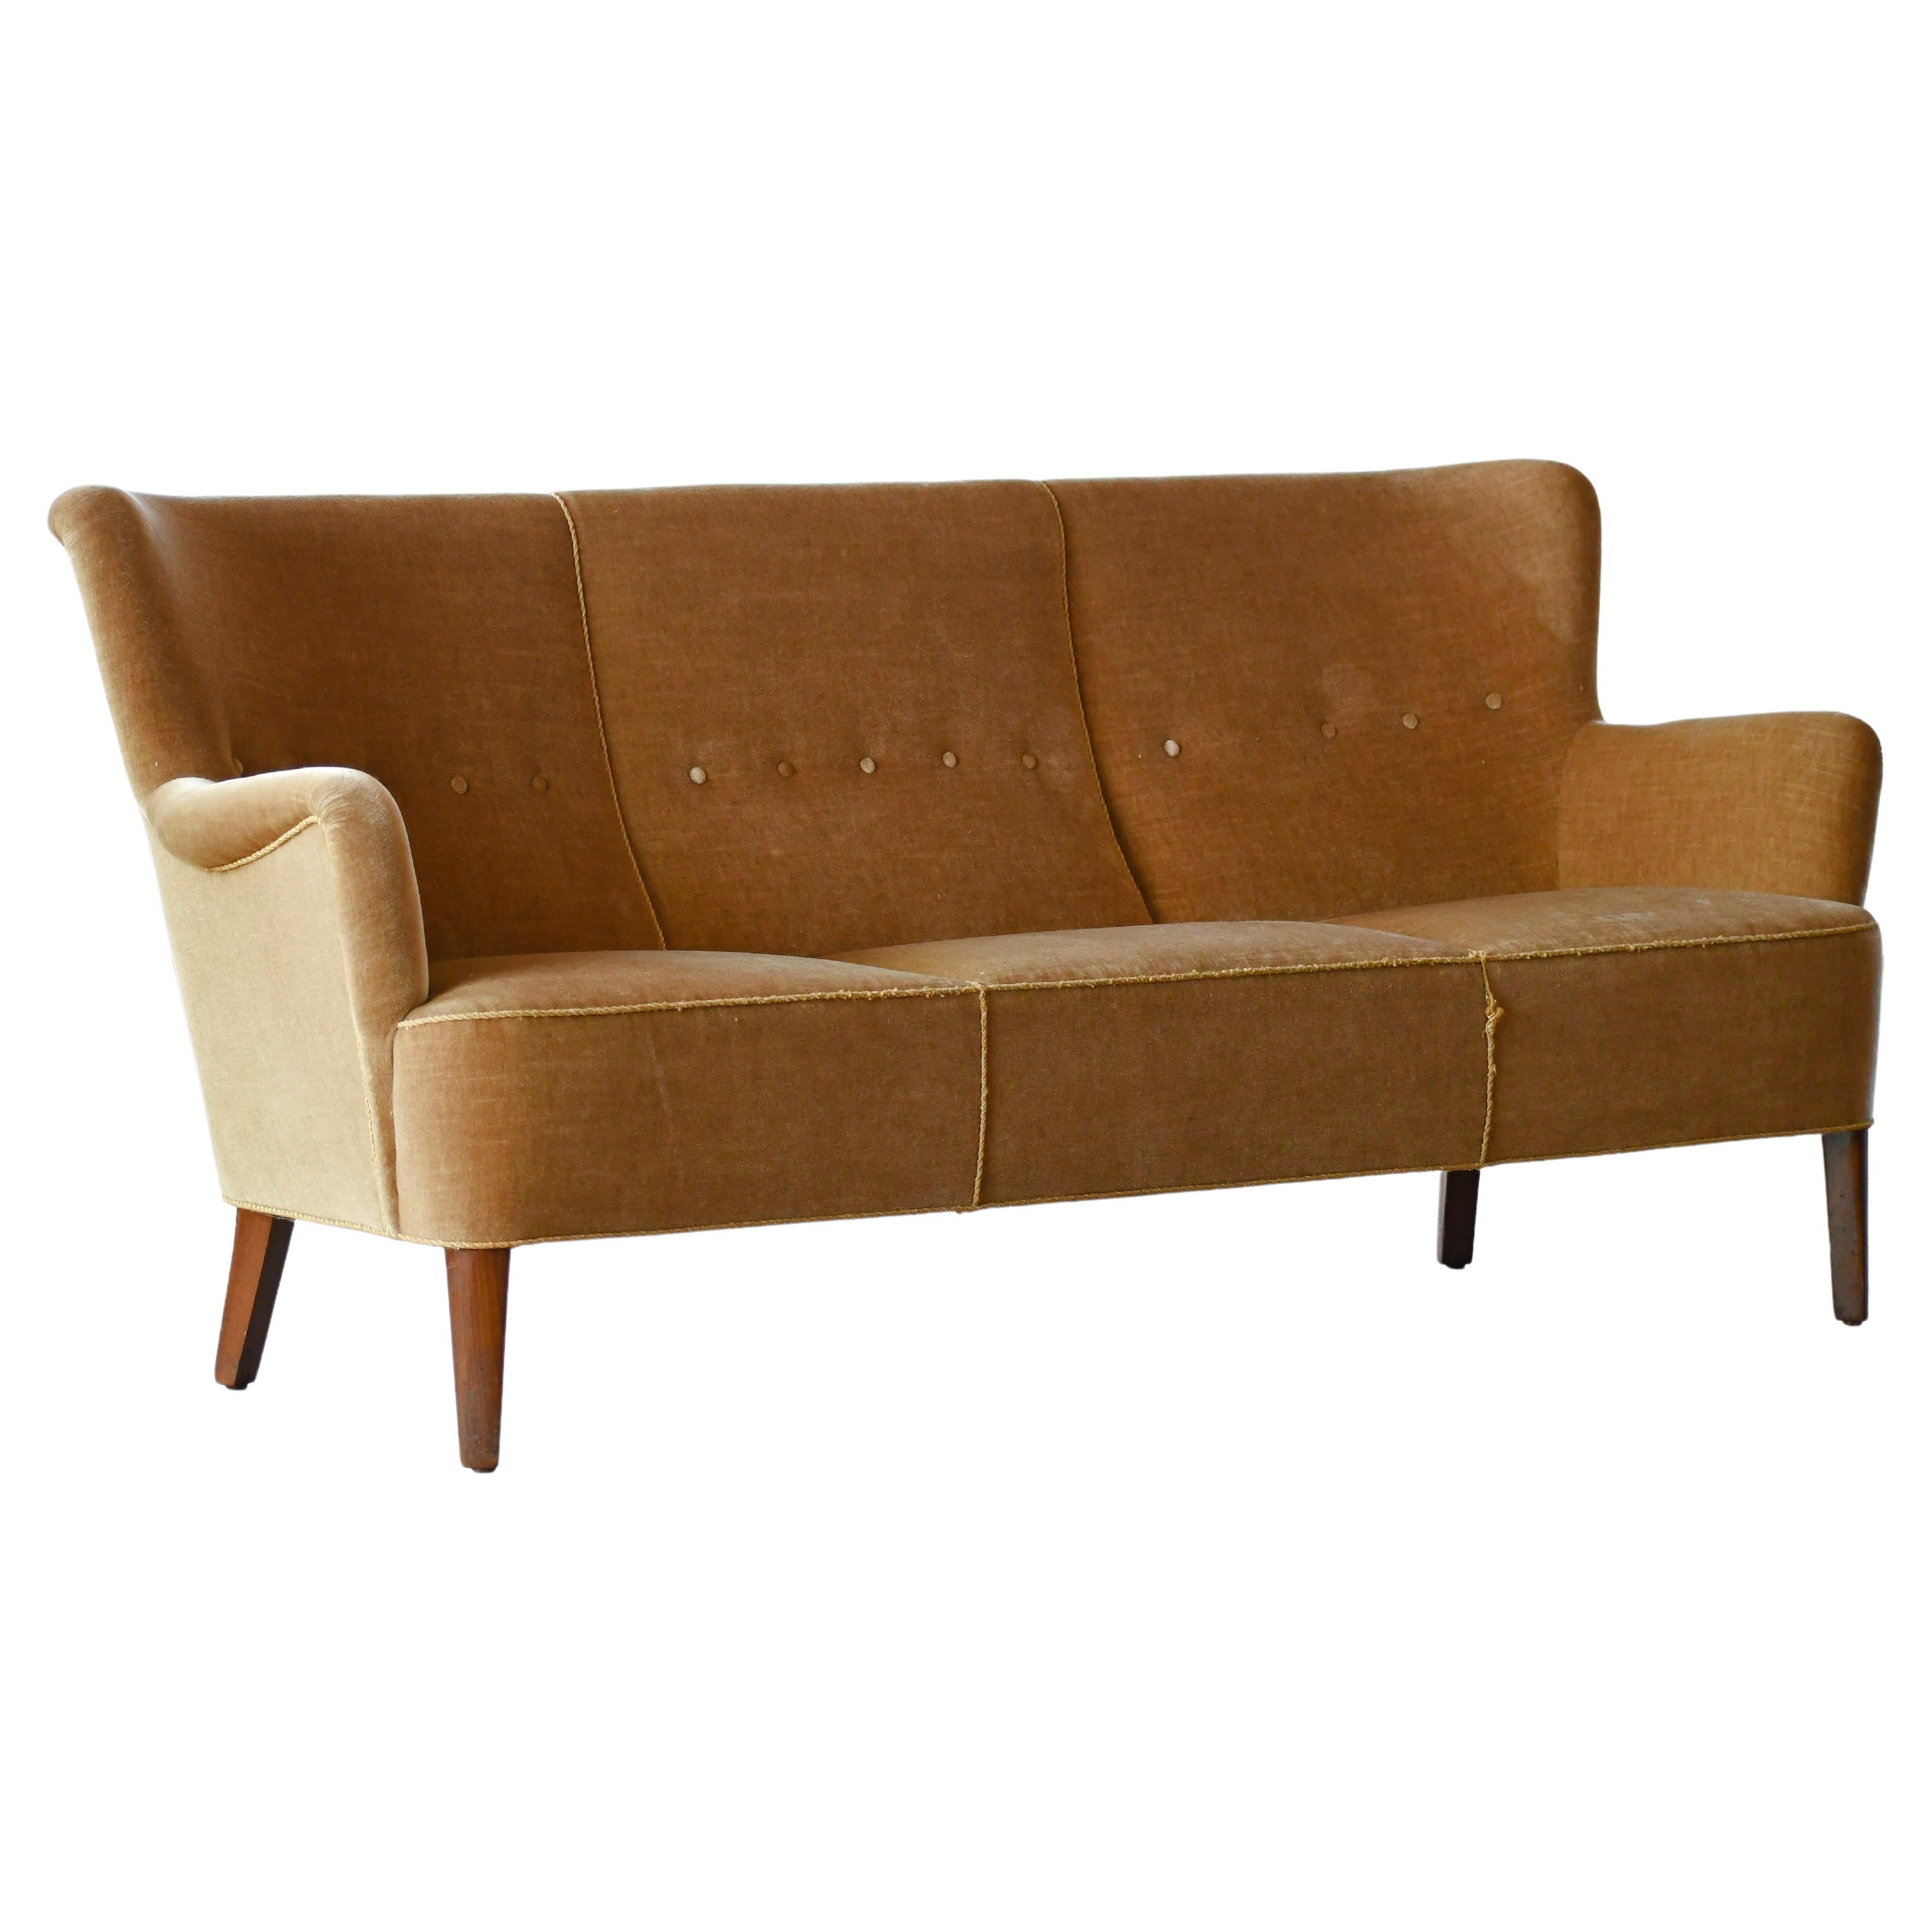 Danish 1950s Sofa Attributed to Fritz Hansen Model 1669 Variant For Sale at  1stDibs | 1950s couch